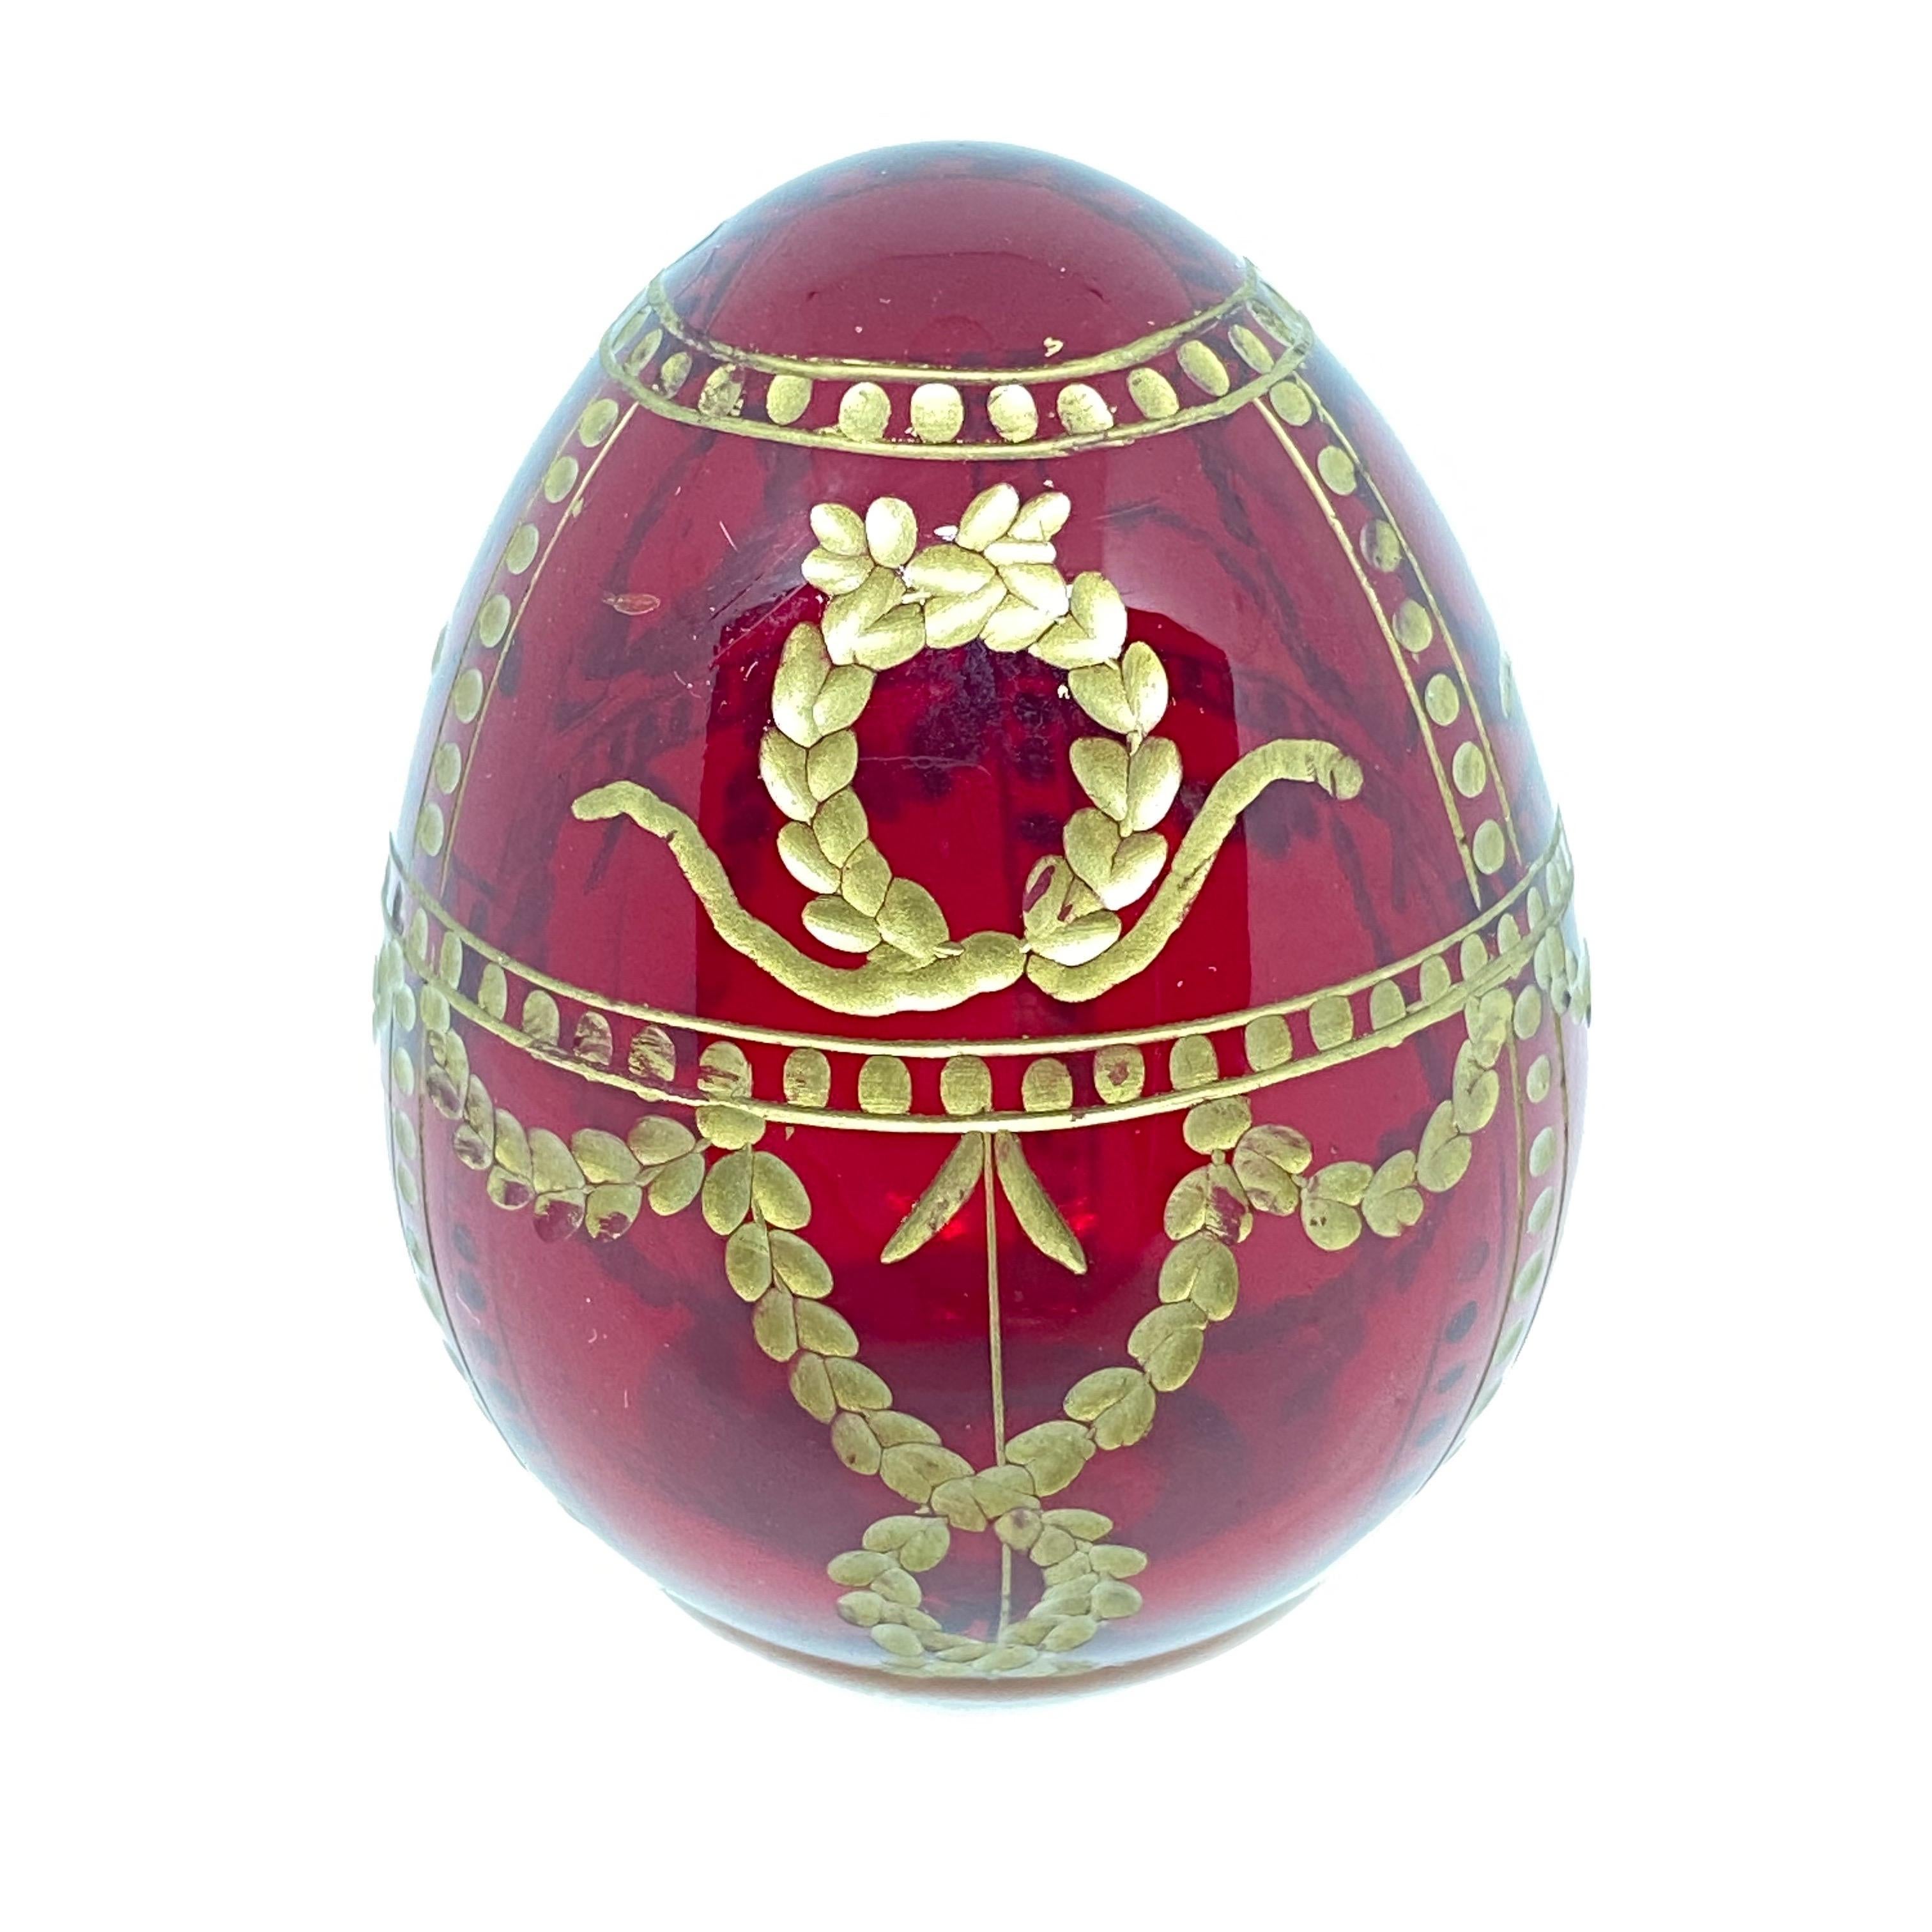 Vintage Faberge Russia style glass egg with etched royal garnishment. Reminiscent of eggs from St. Petersburg. Measures: 1.63